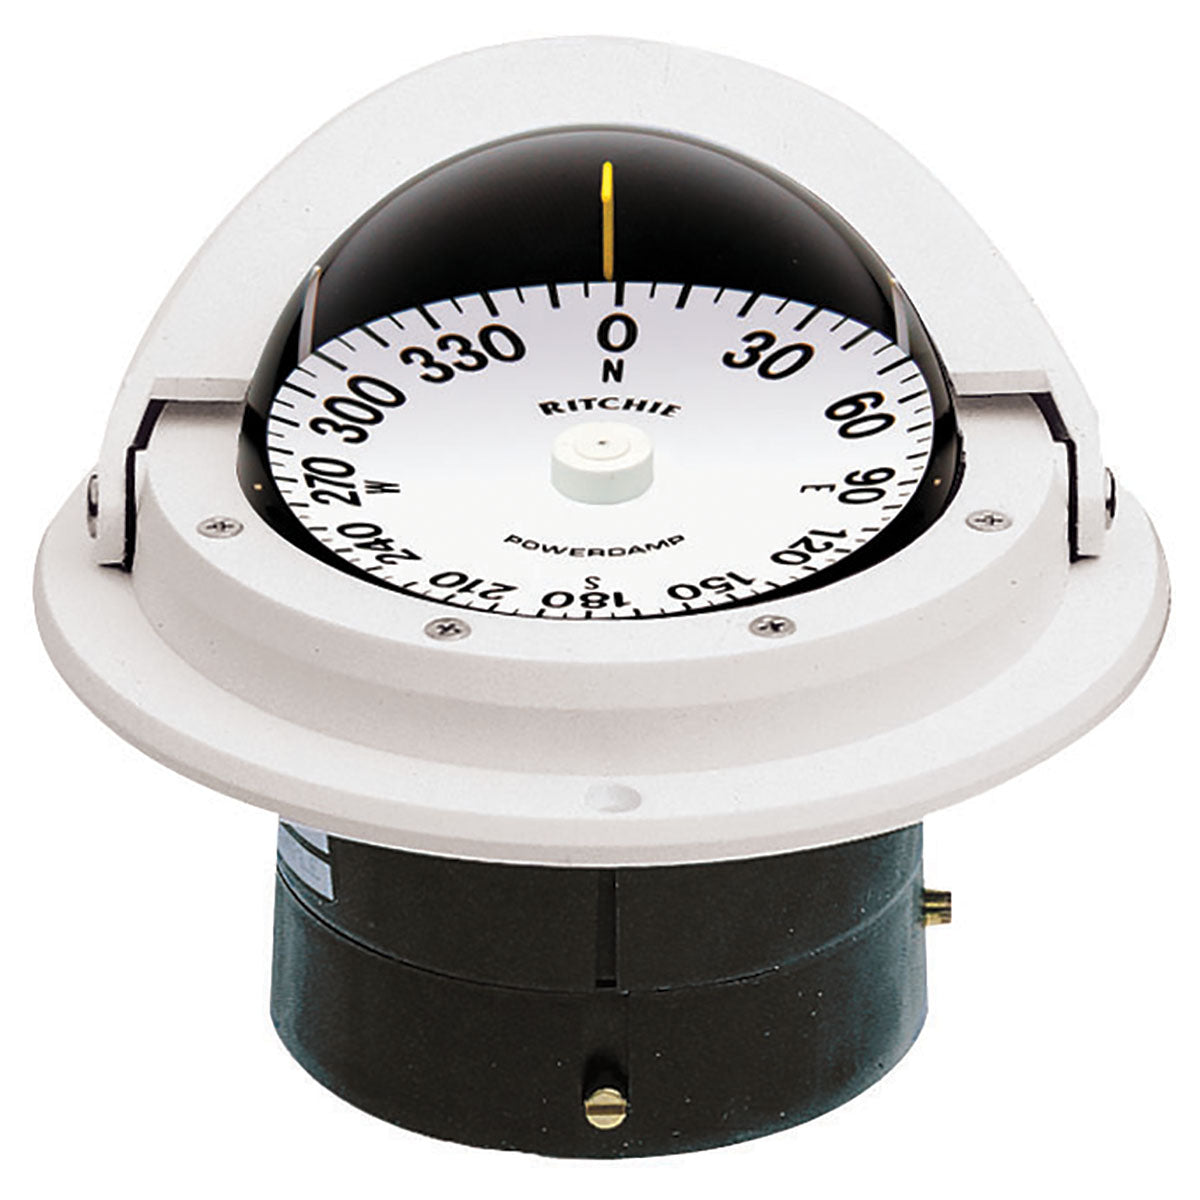 Ritchie F-82 Voyager Compass - Flush Mount